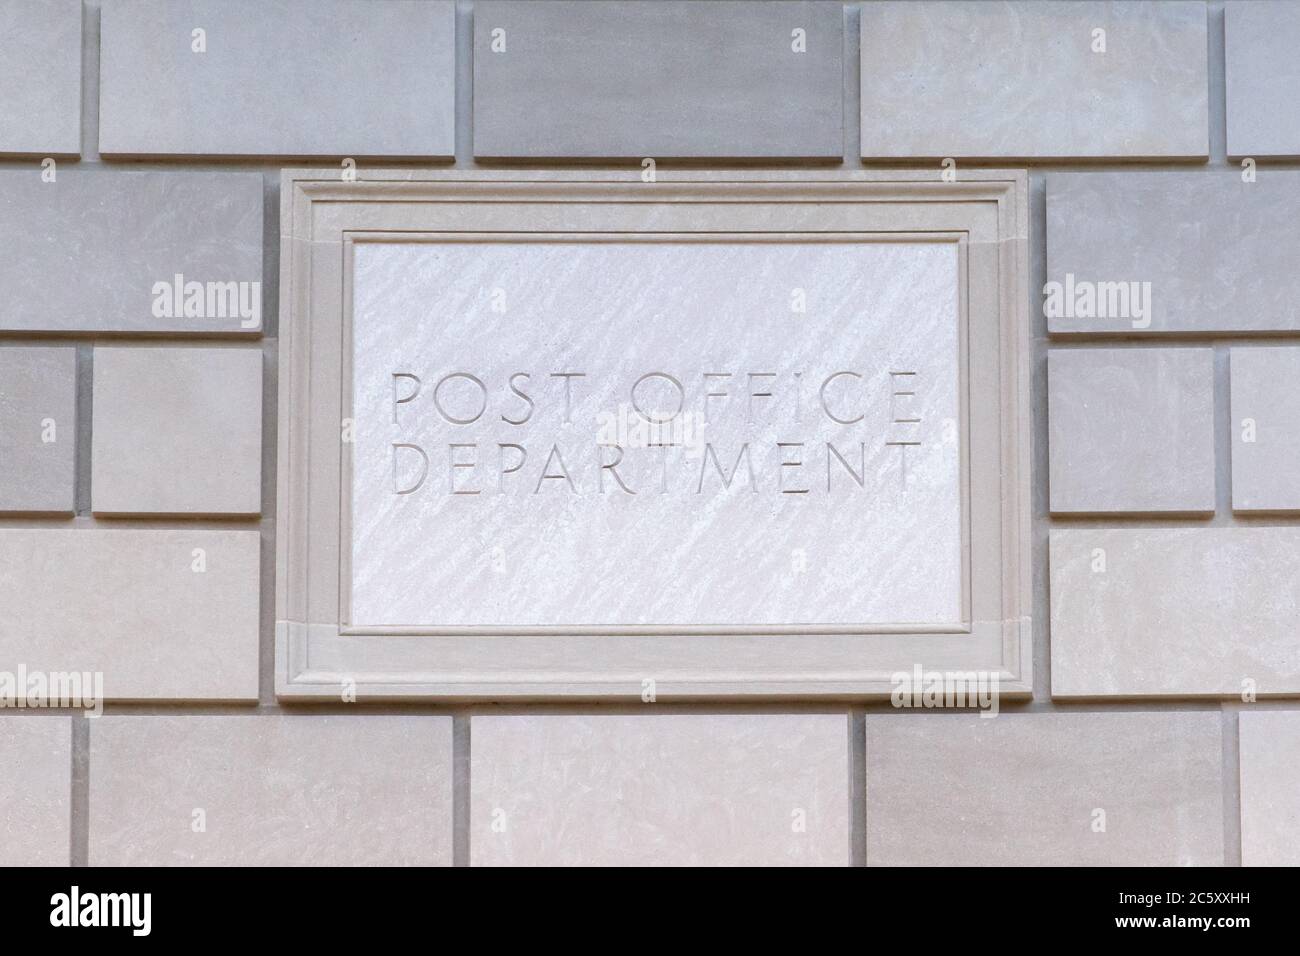 Washington, D.C. / USA - July 05 2020: Sign at the entrance of the United States Post Office Department. Stock Photo